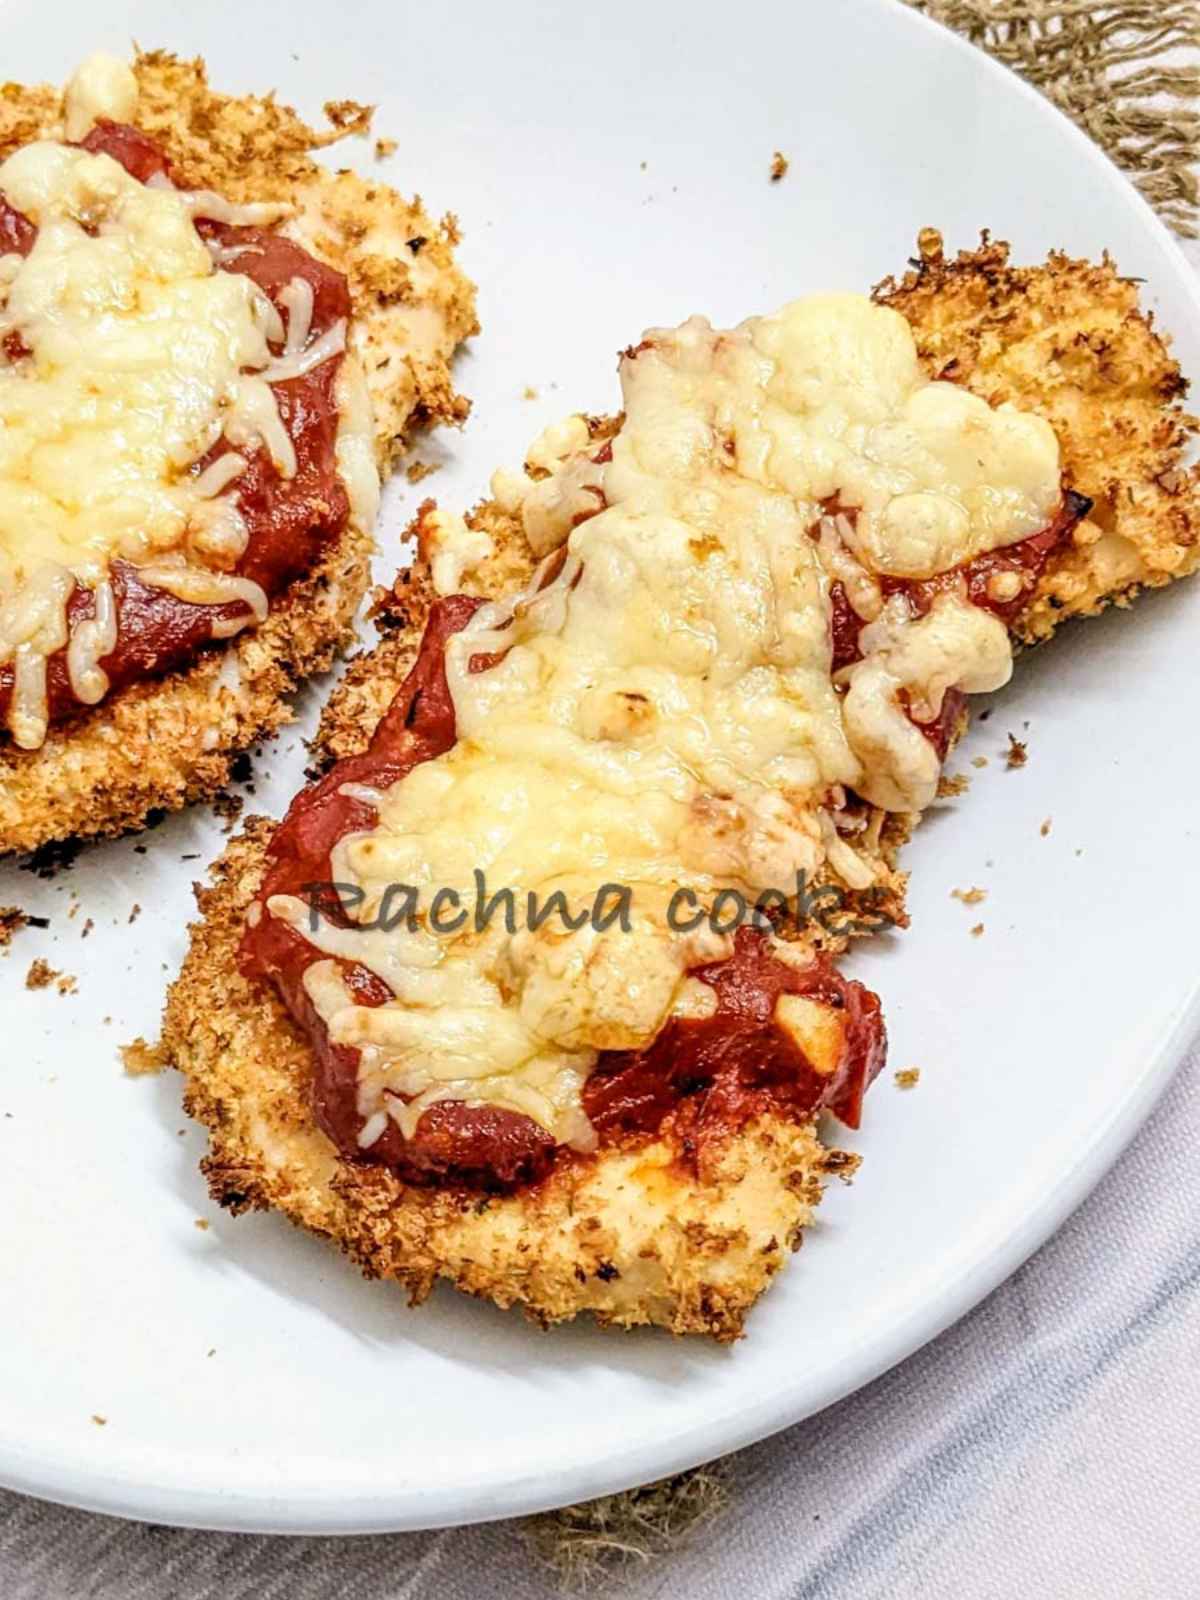 Chicken parm on a white plate.